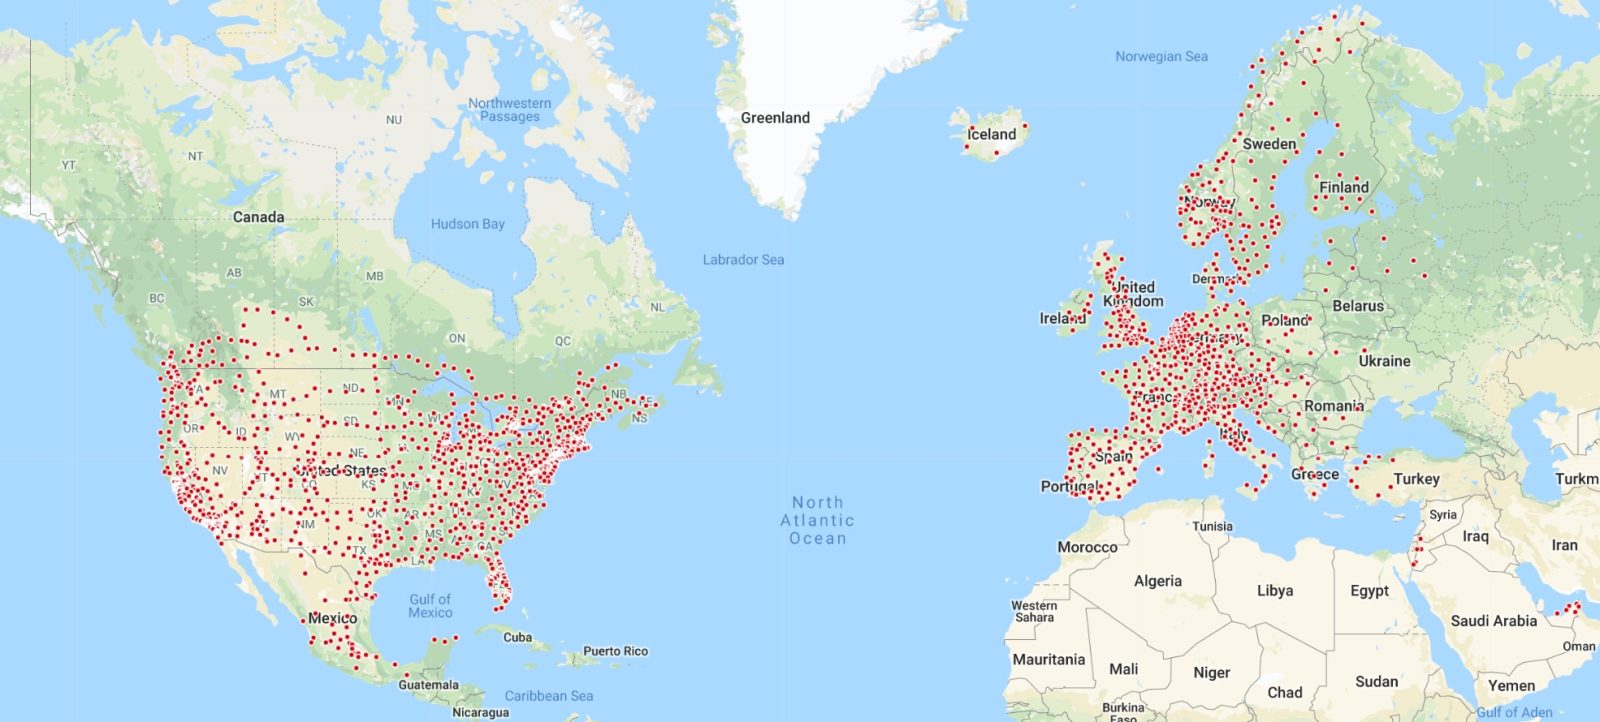 Tesla Updates 2020 Supercharger Map With New Locations Electrek,How To Open A Locked Bedroom Door Without A Key